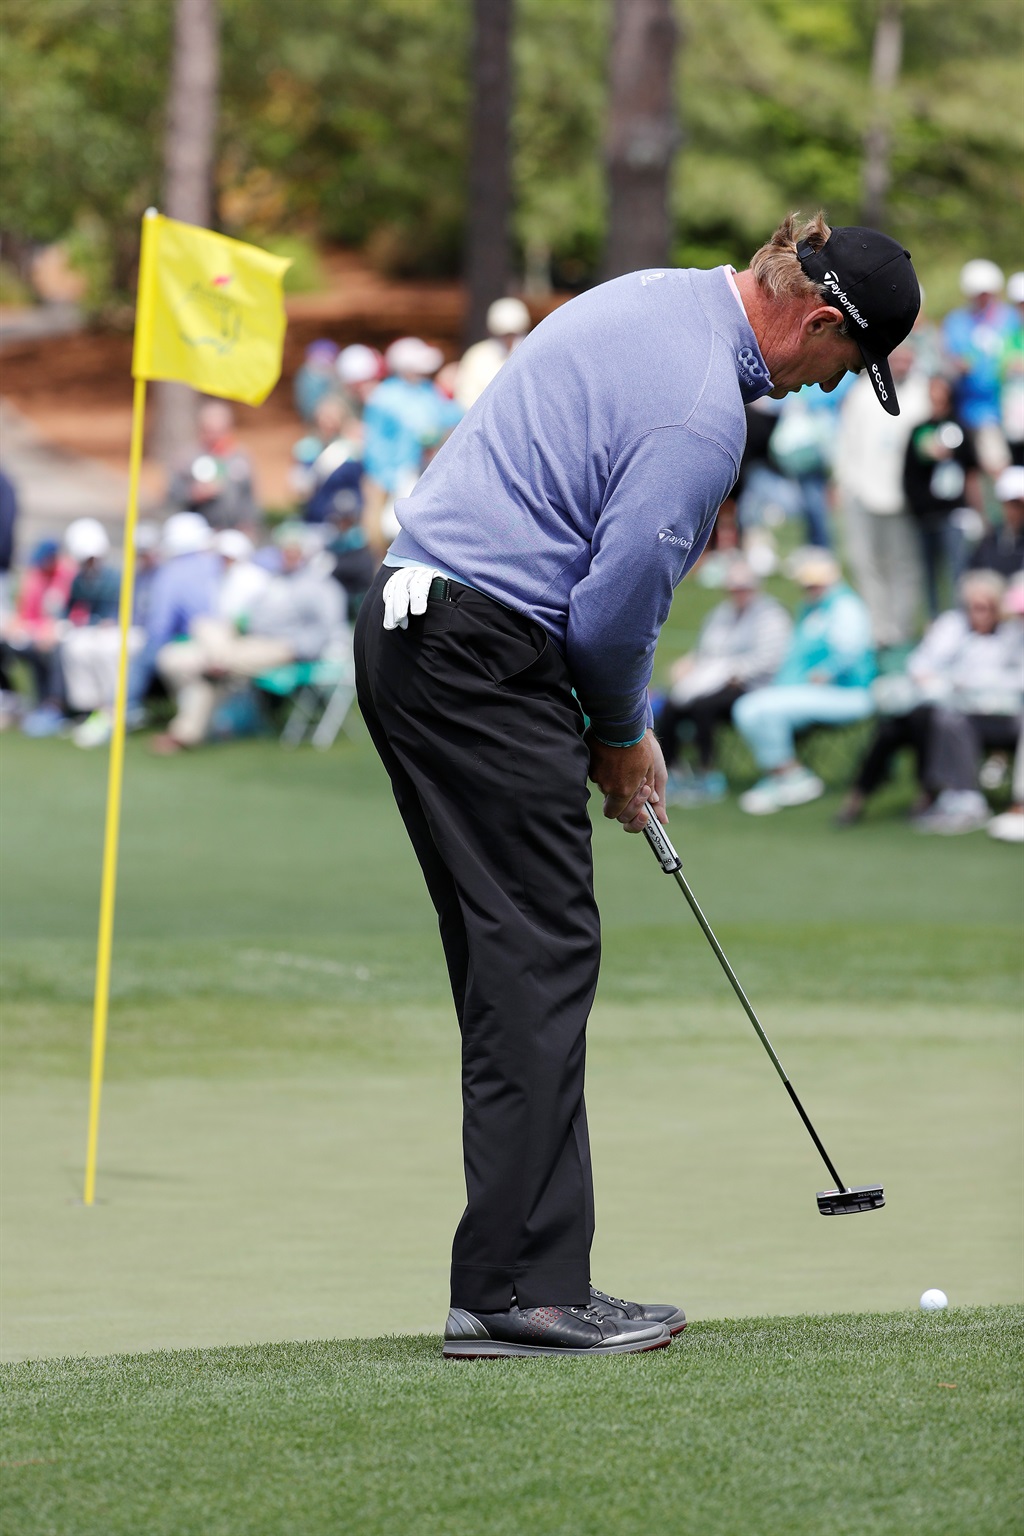 Ernie Els putts on the second hole during the first round of the 2017 Masters Tournament at the Augusta National Golf Club in Augusta, Georgia. Picture: Erik S. Lesser/EPA